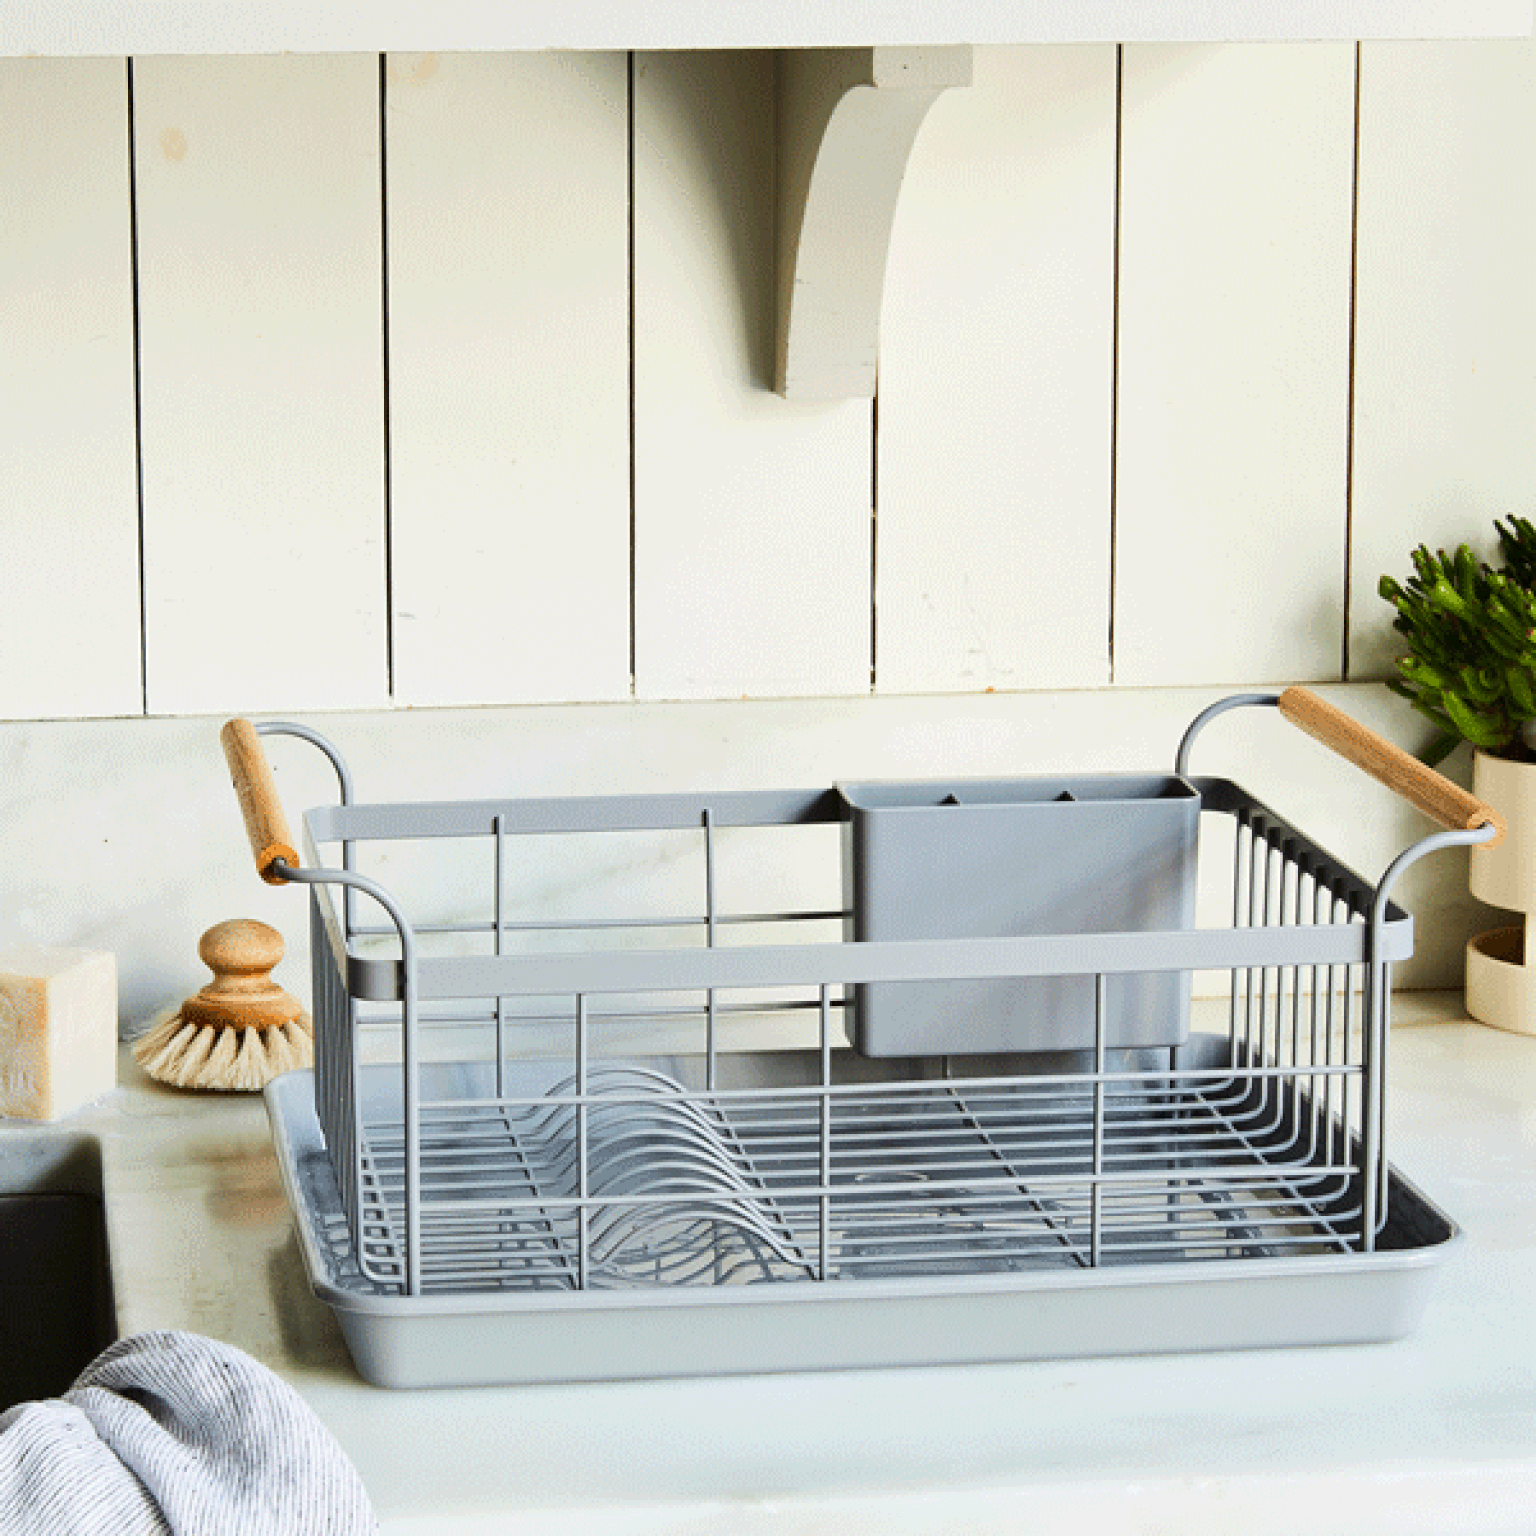 Food52 Five Two Drying Rack, Over the Sink with Utensil Caddy, 3